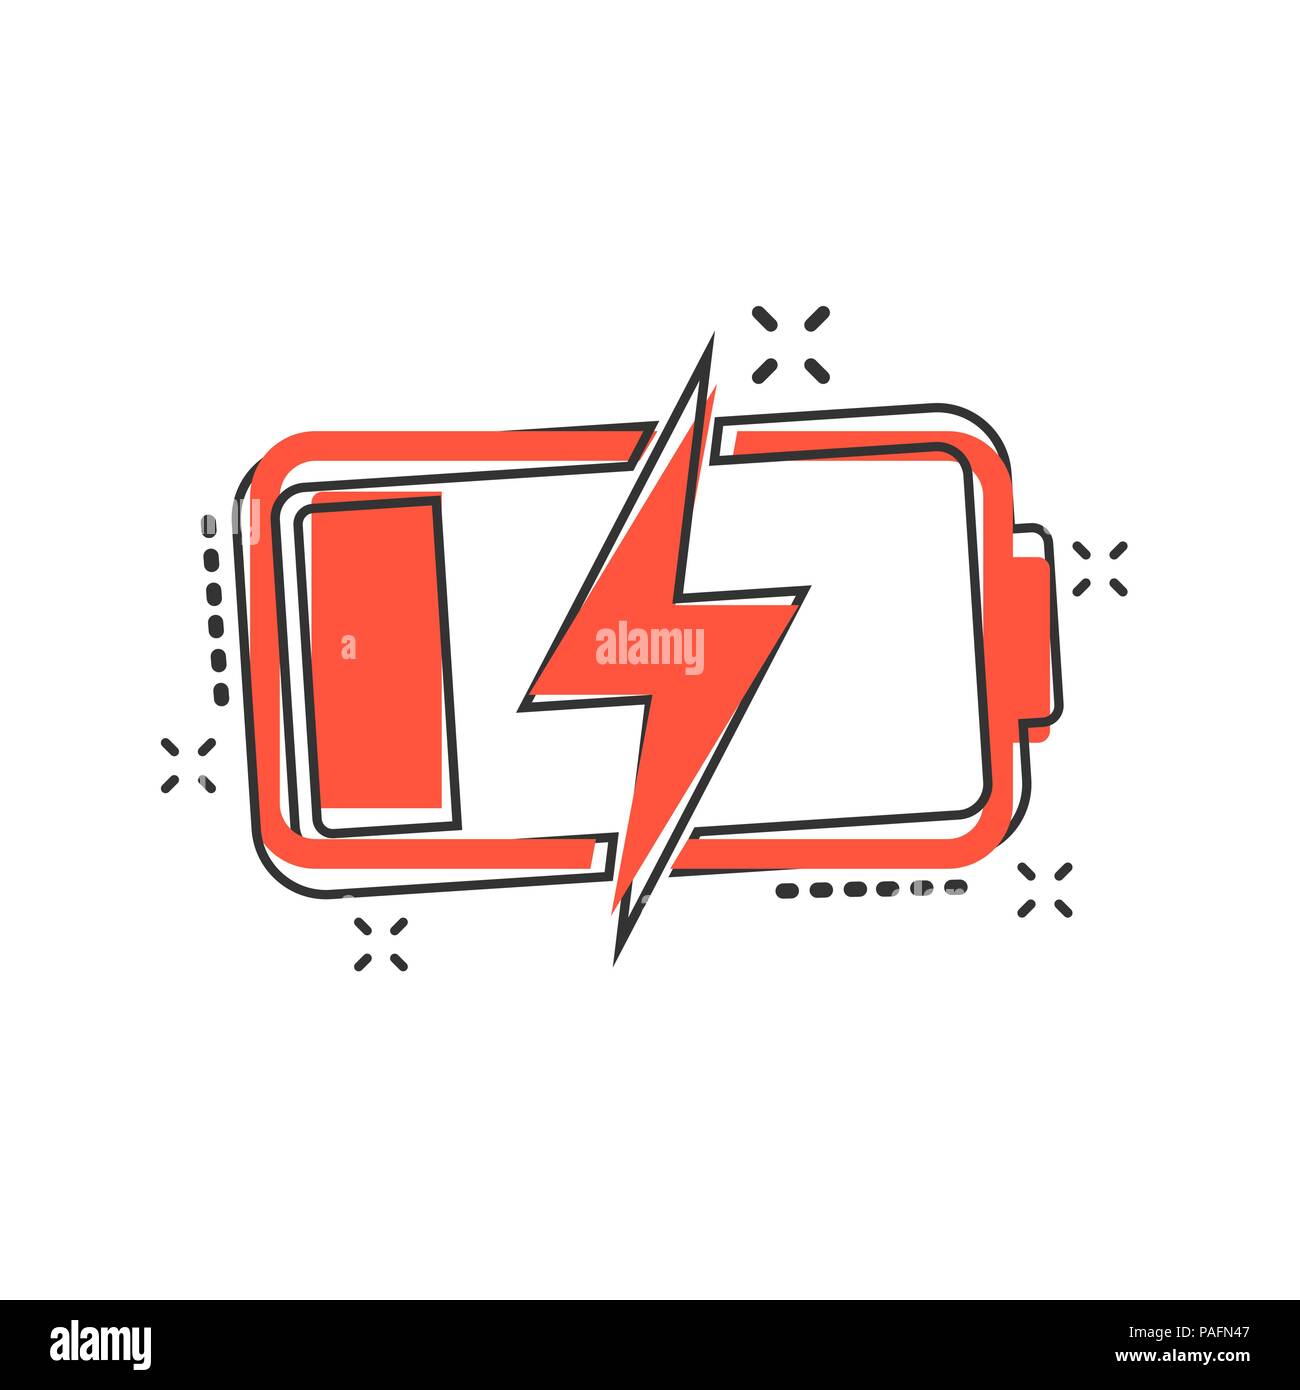 Cartoon Battery High Resolution Stock Photography and Images - Alamy